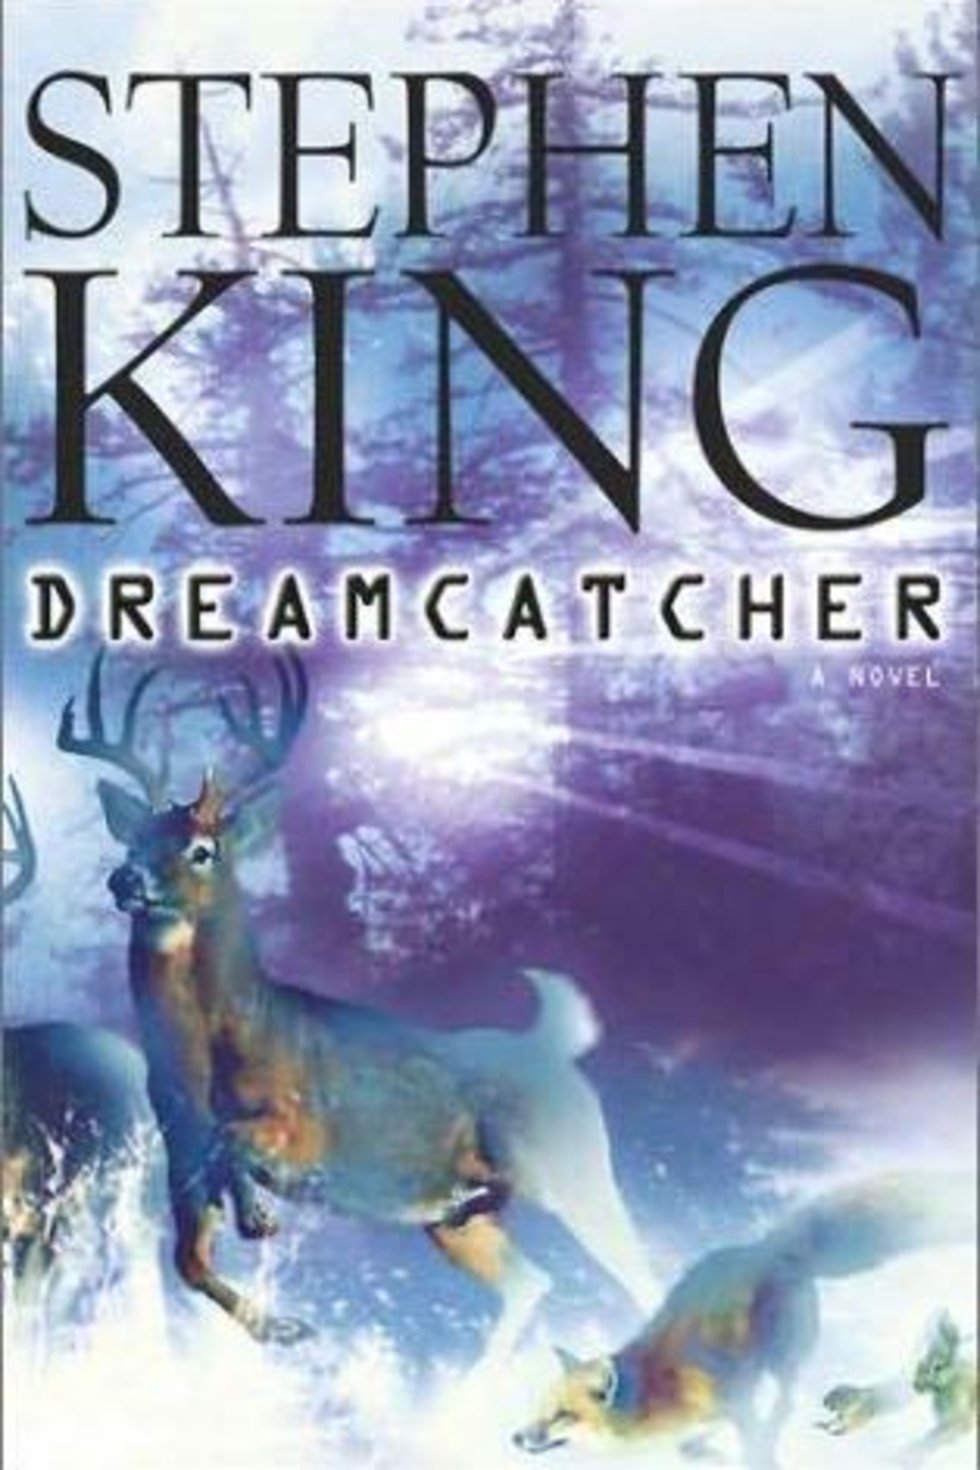 Friday Reads: Dreamcatcher by Stephen King